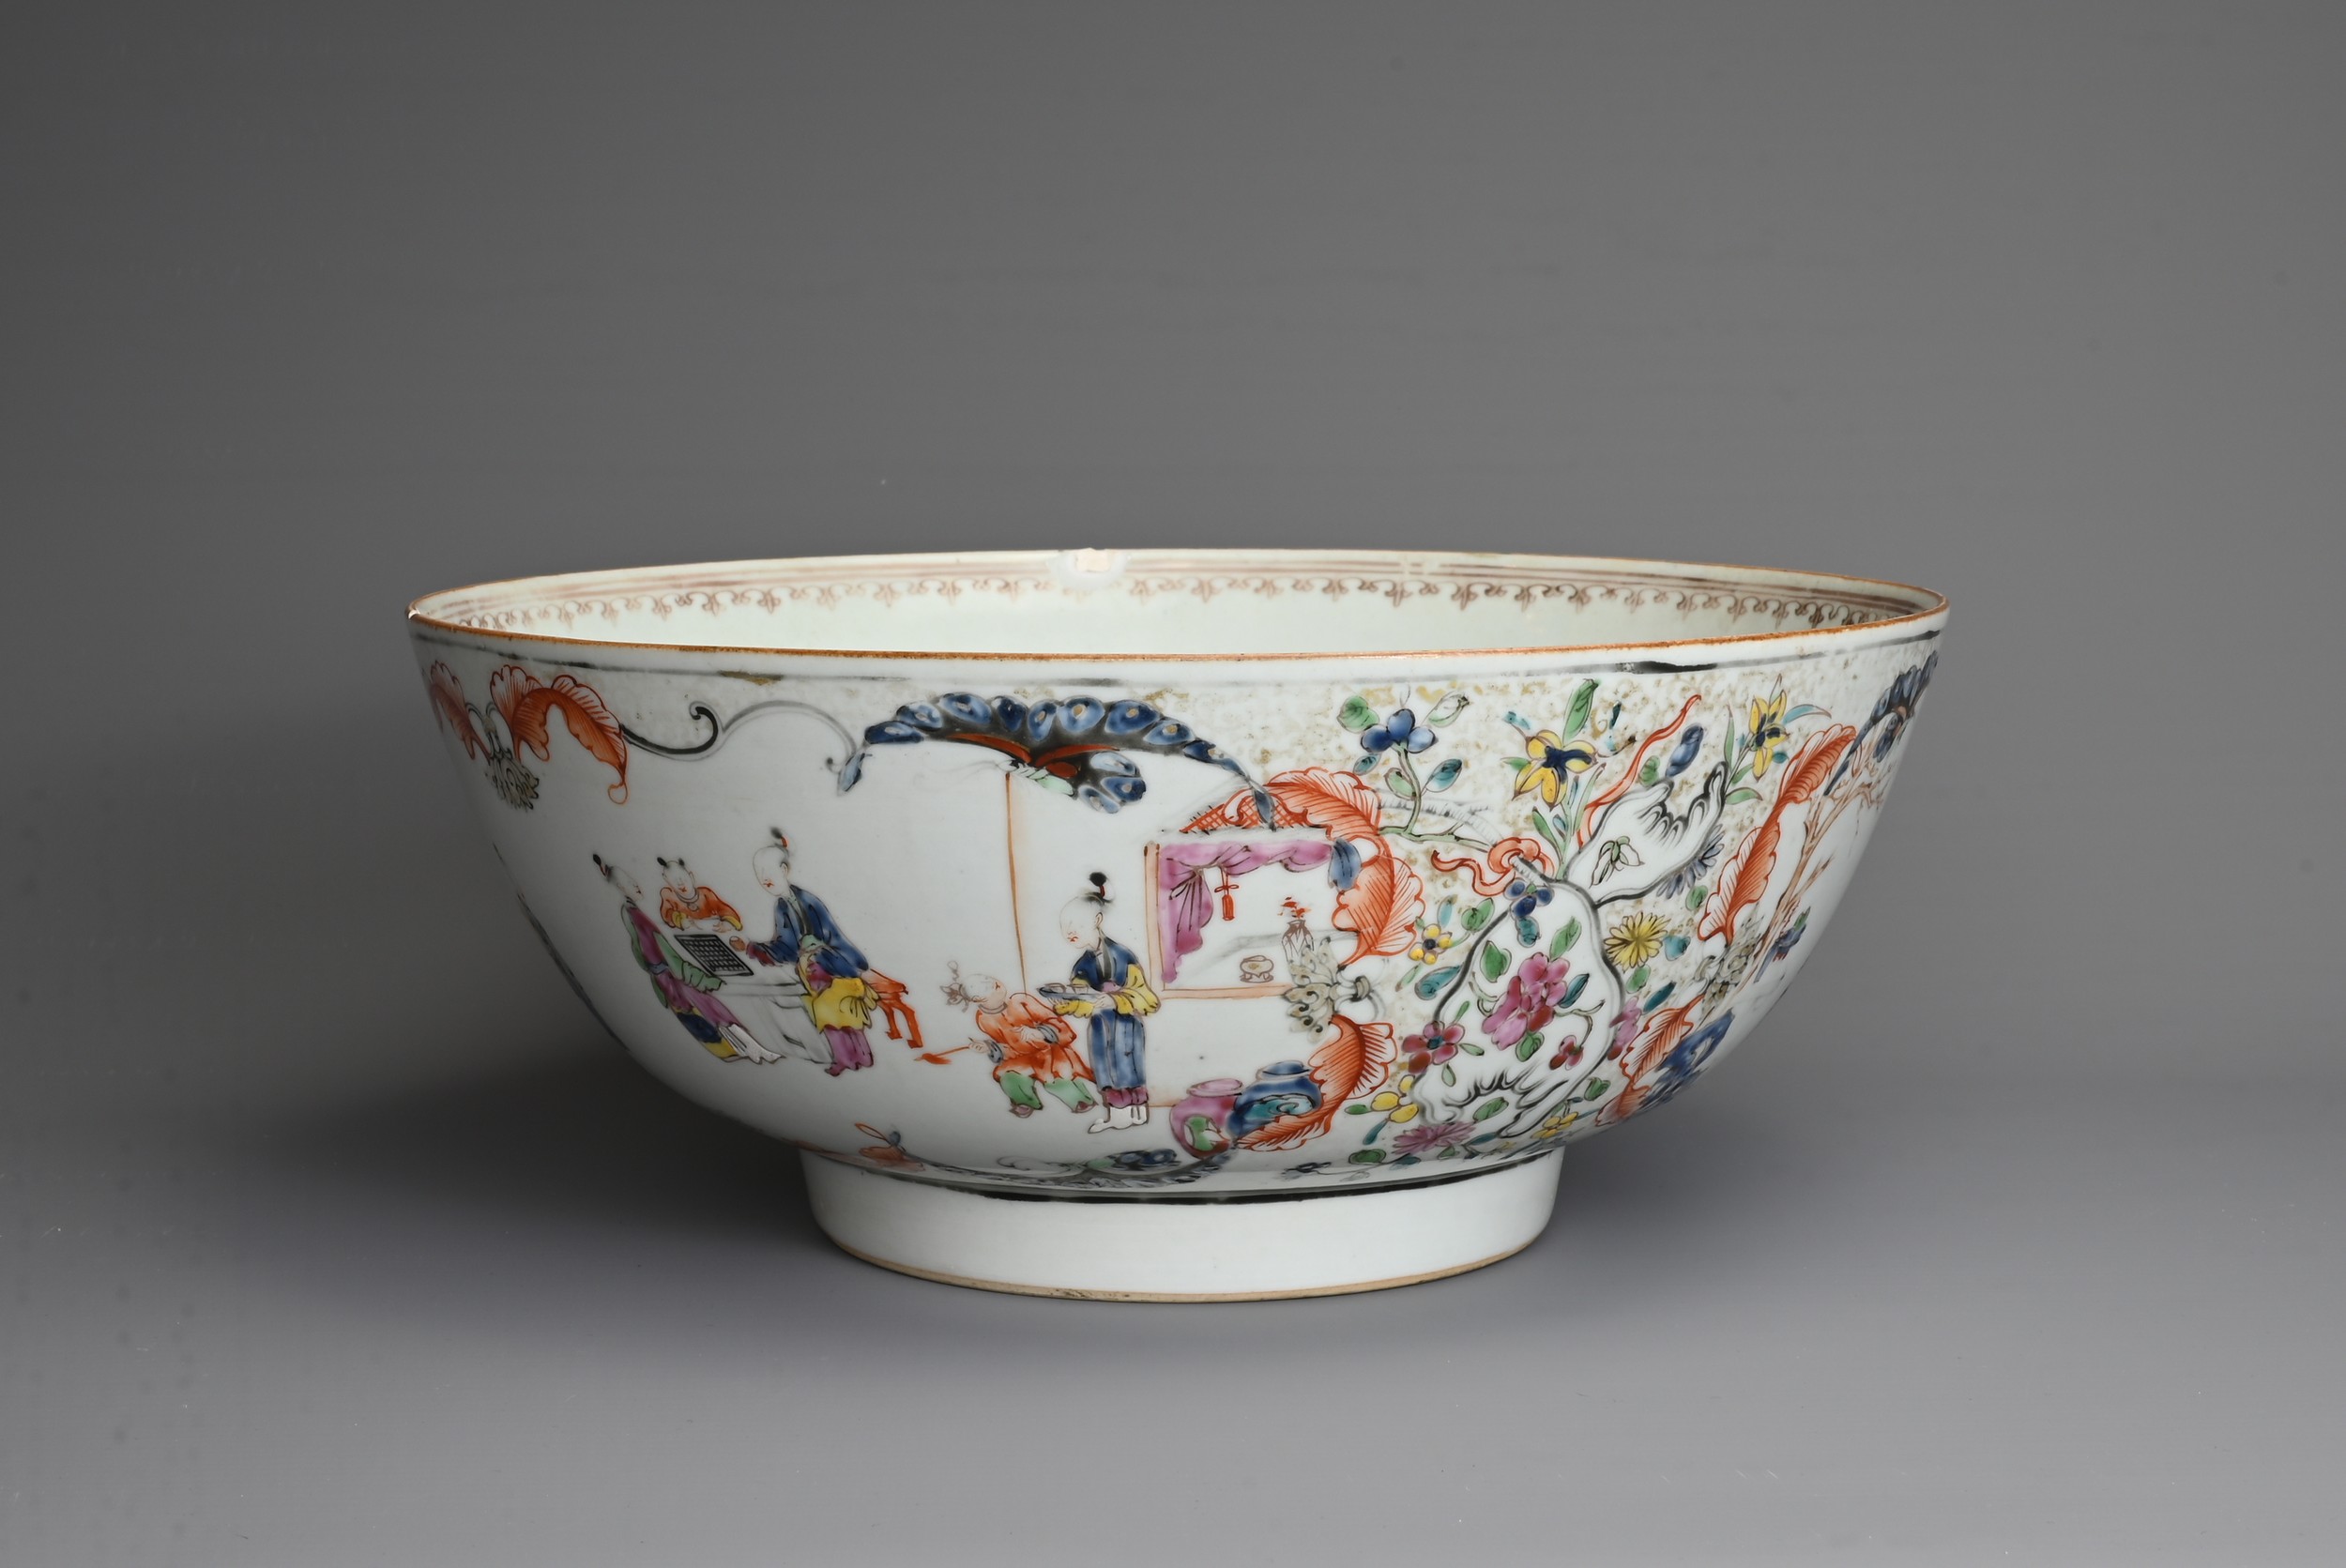 A CHINESE FAMILLE ROSE PORCELAIN PUNCH BOWL, 18TH CENTURY. Decorated with figures in a courtyard